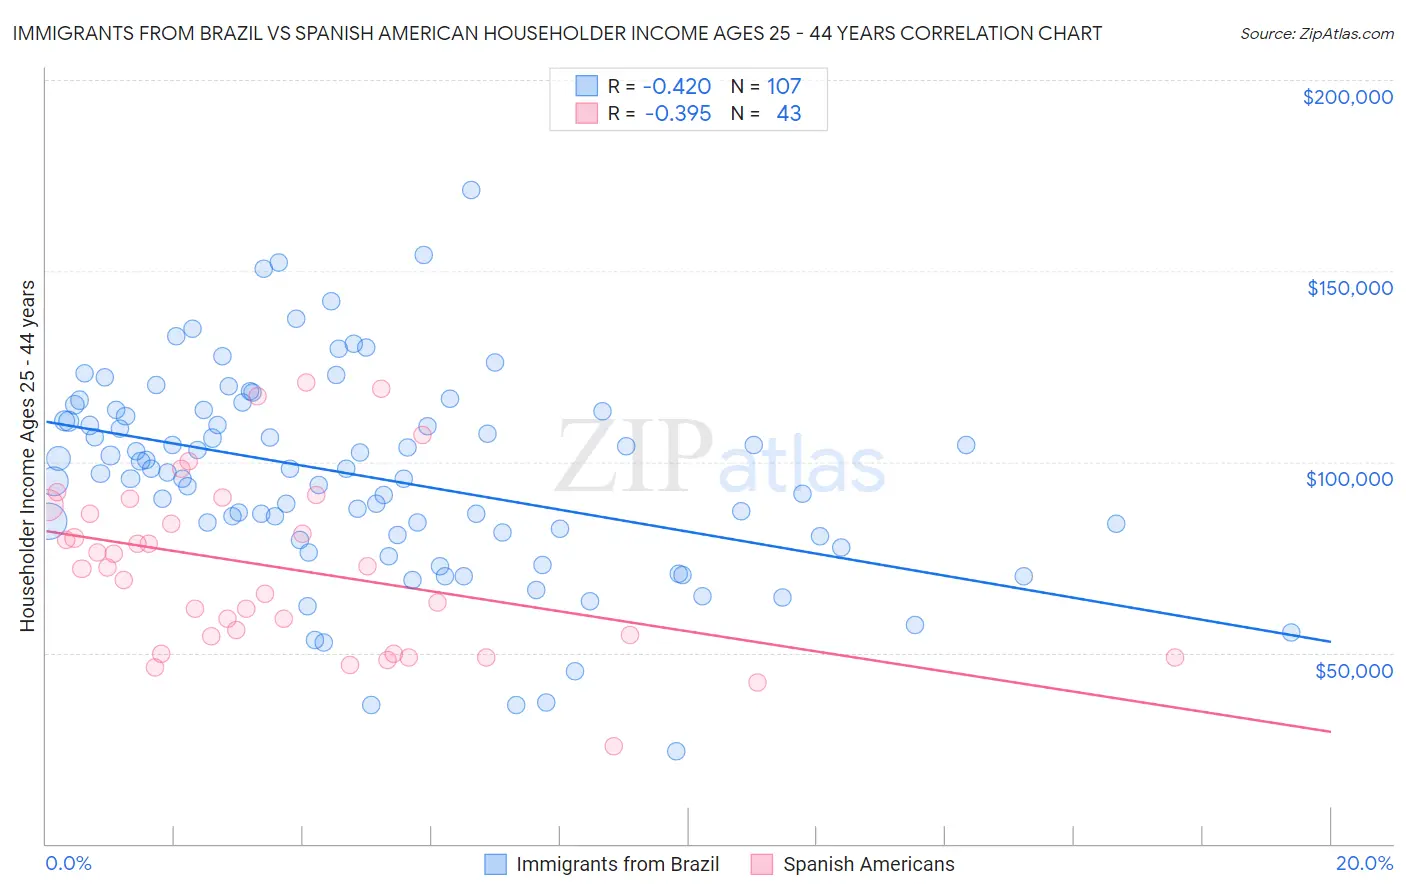 Immigrants from Brazil vs Spanish American Householder Income Ages 25 - 44 years